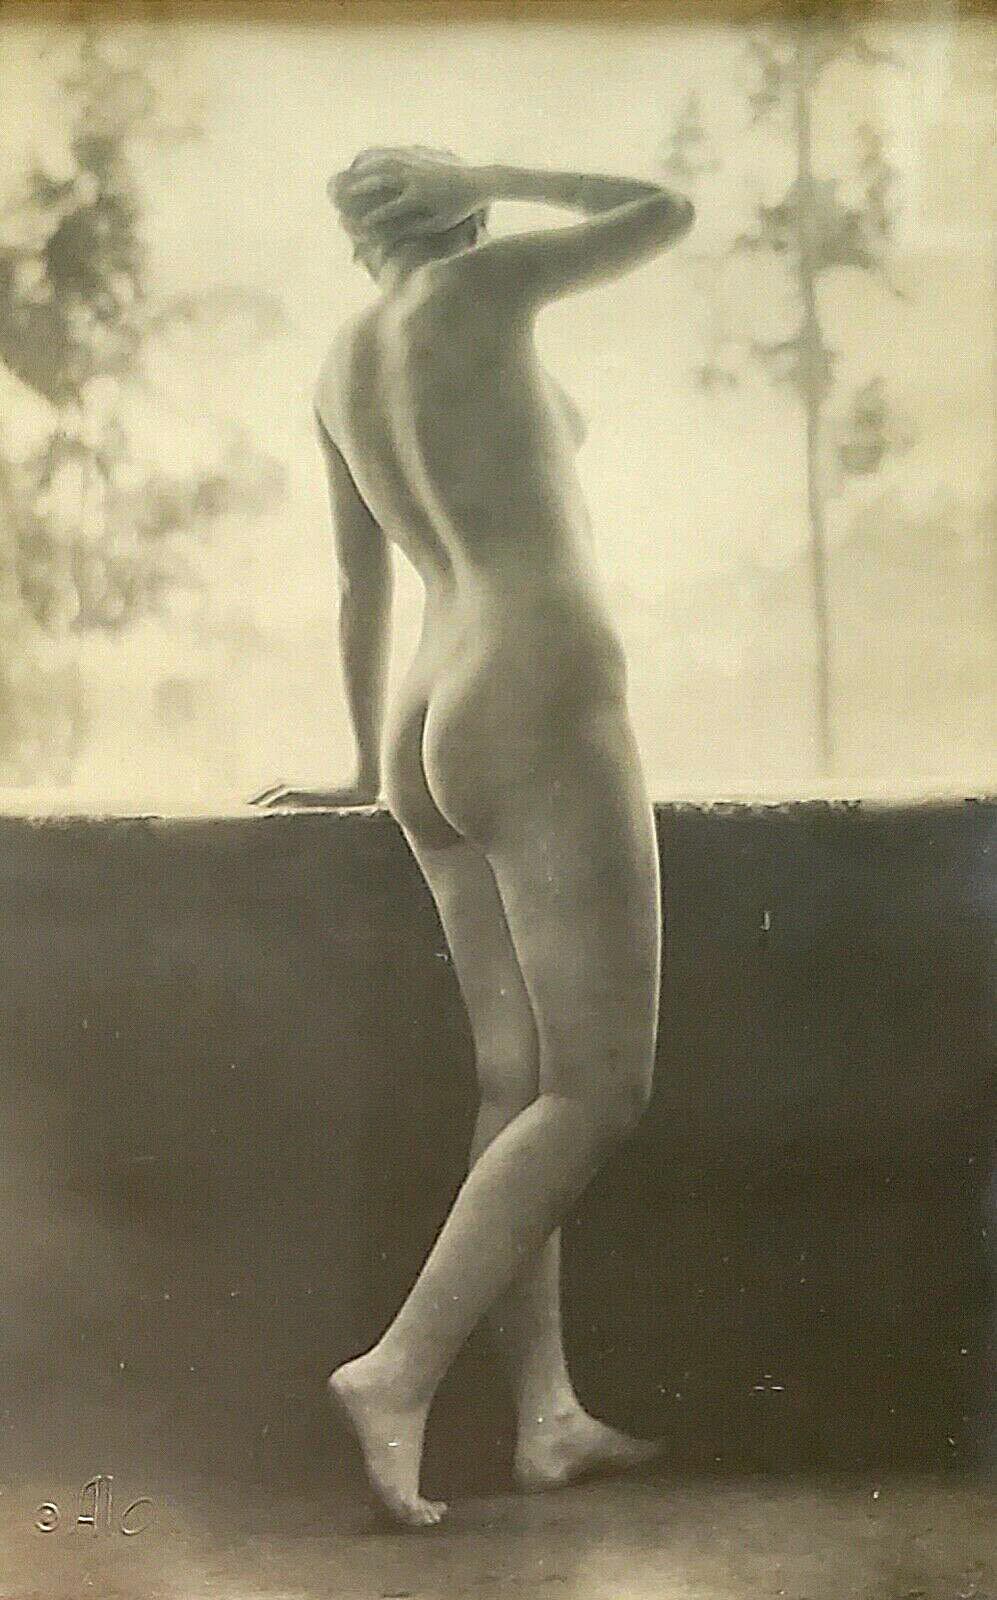 Albert Arthur Allen :: Coy Nymph, rear view, 1920s. Attributed to Albert Arthur Allen, Alo studios blind-stamped on lower left t. Seller's note: the item had been shot with & without flash through the glass of its original frame, the real tone is in between these above. | src eBay